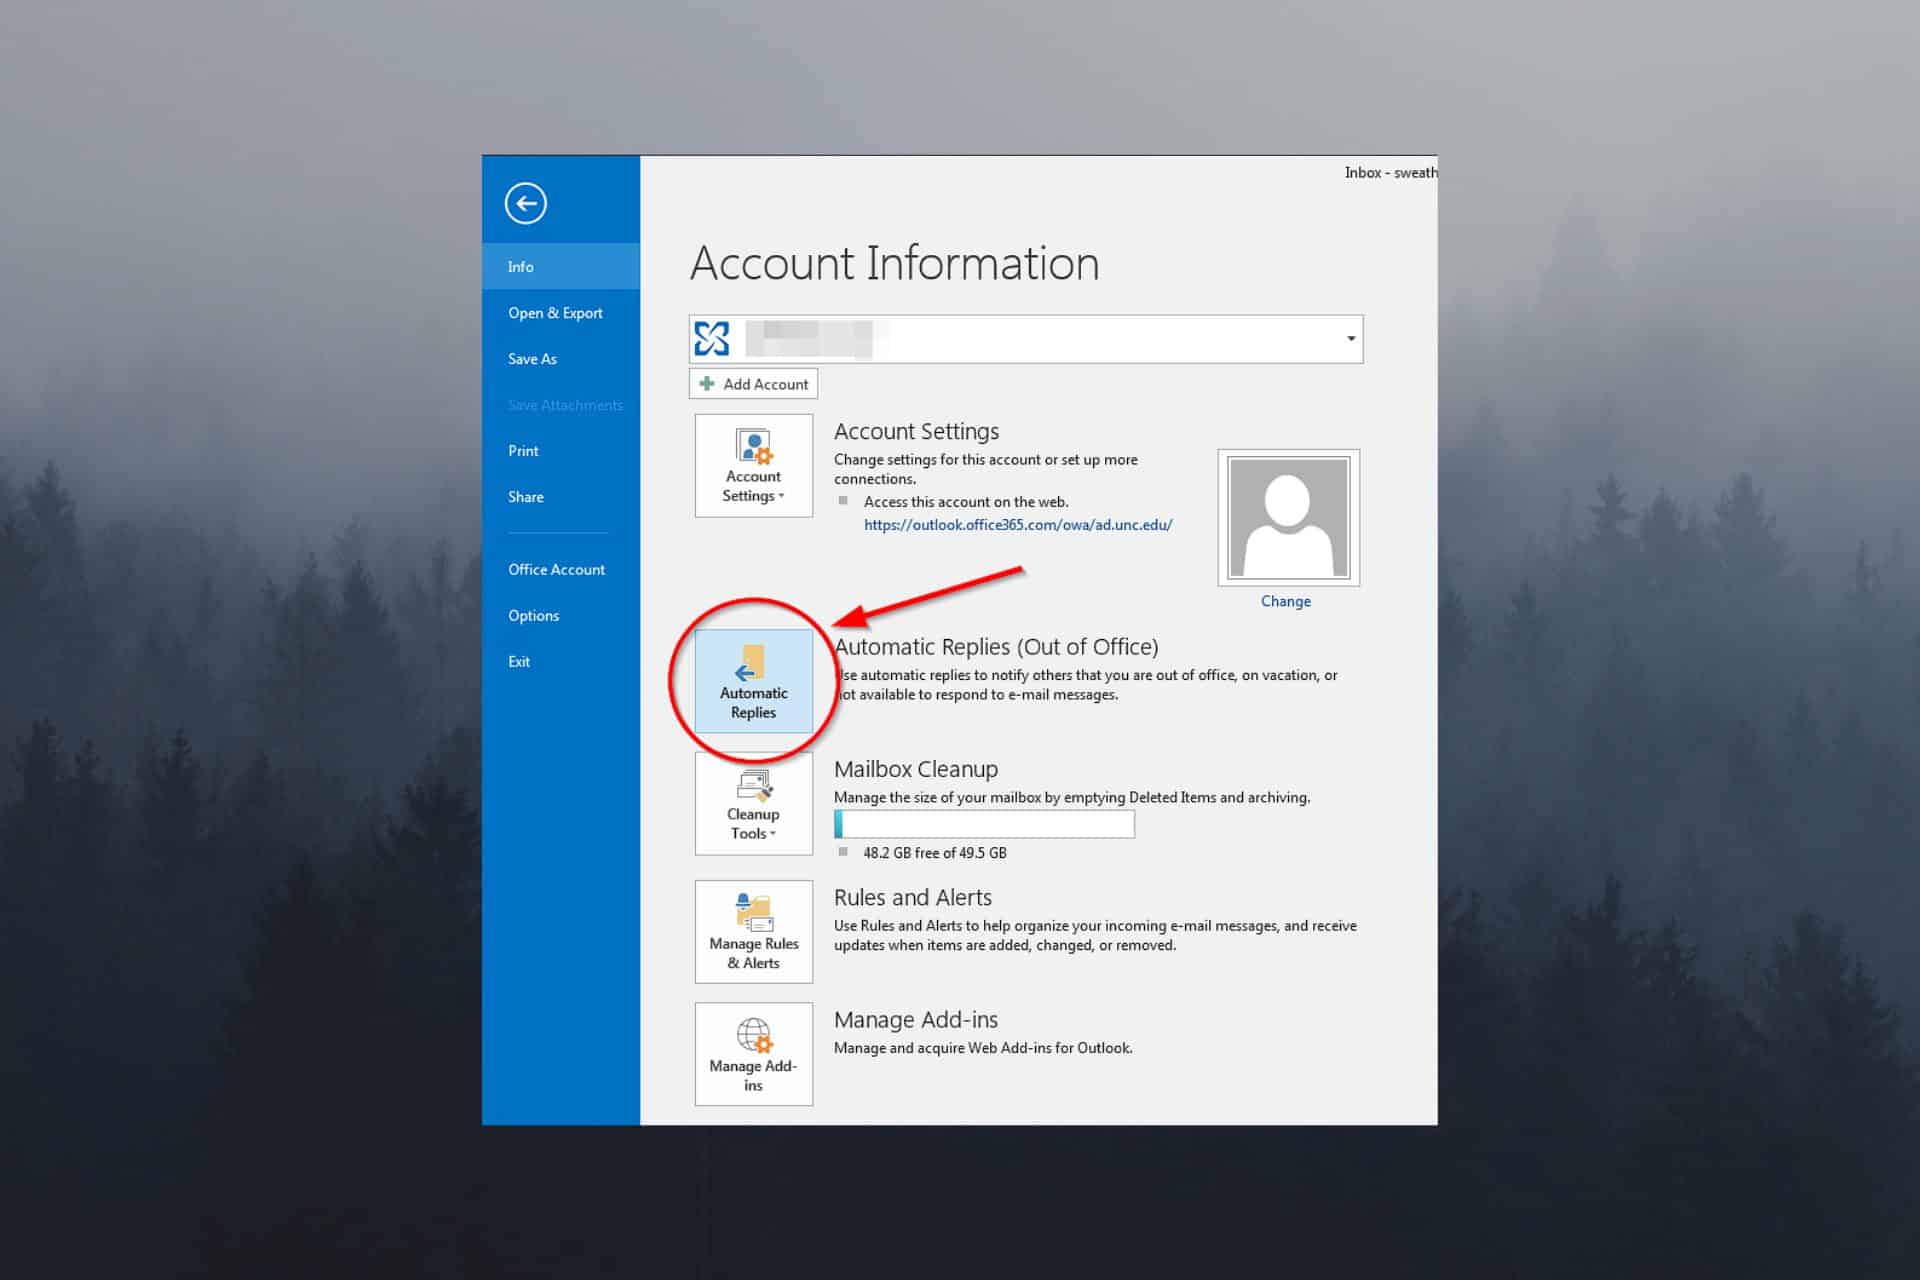 How to Set Out of Office Automatic Reply in Outlook